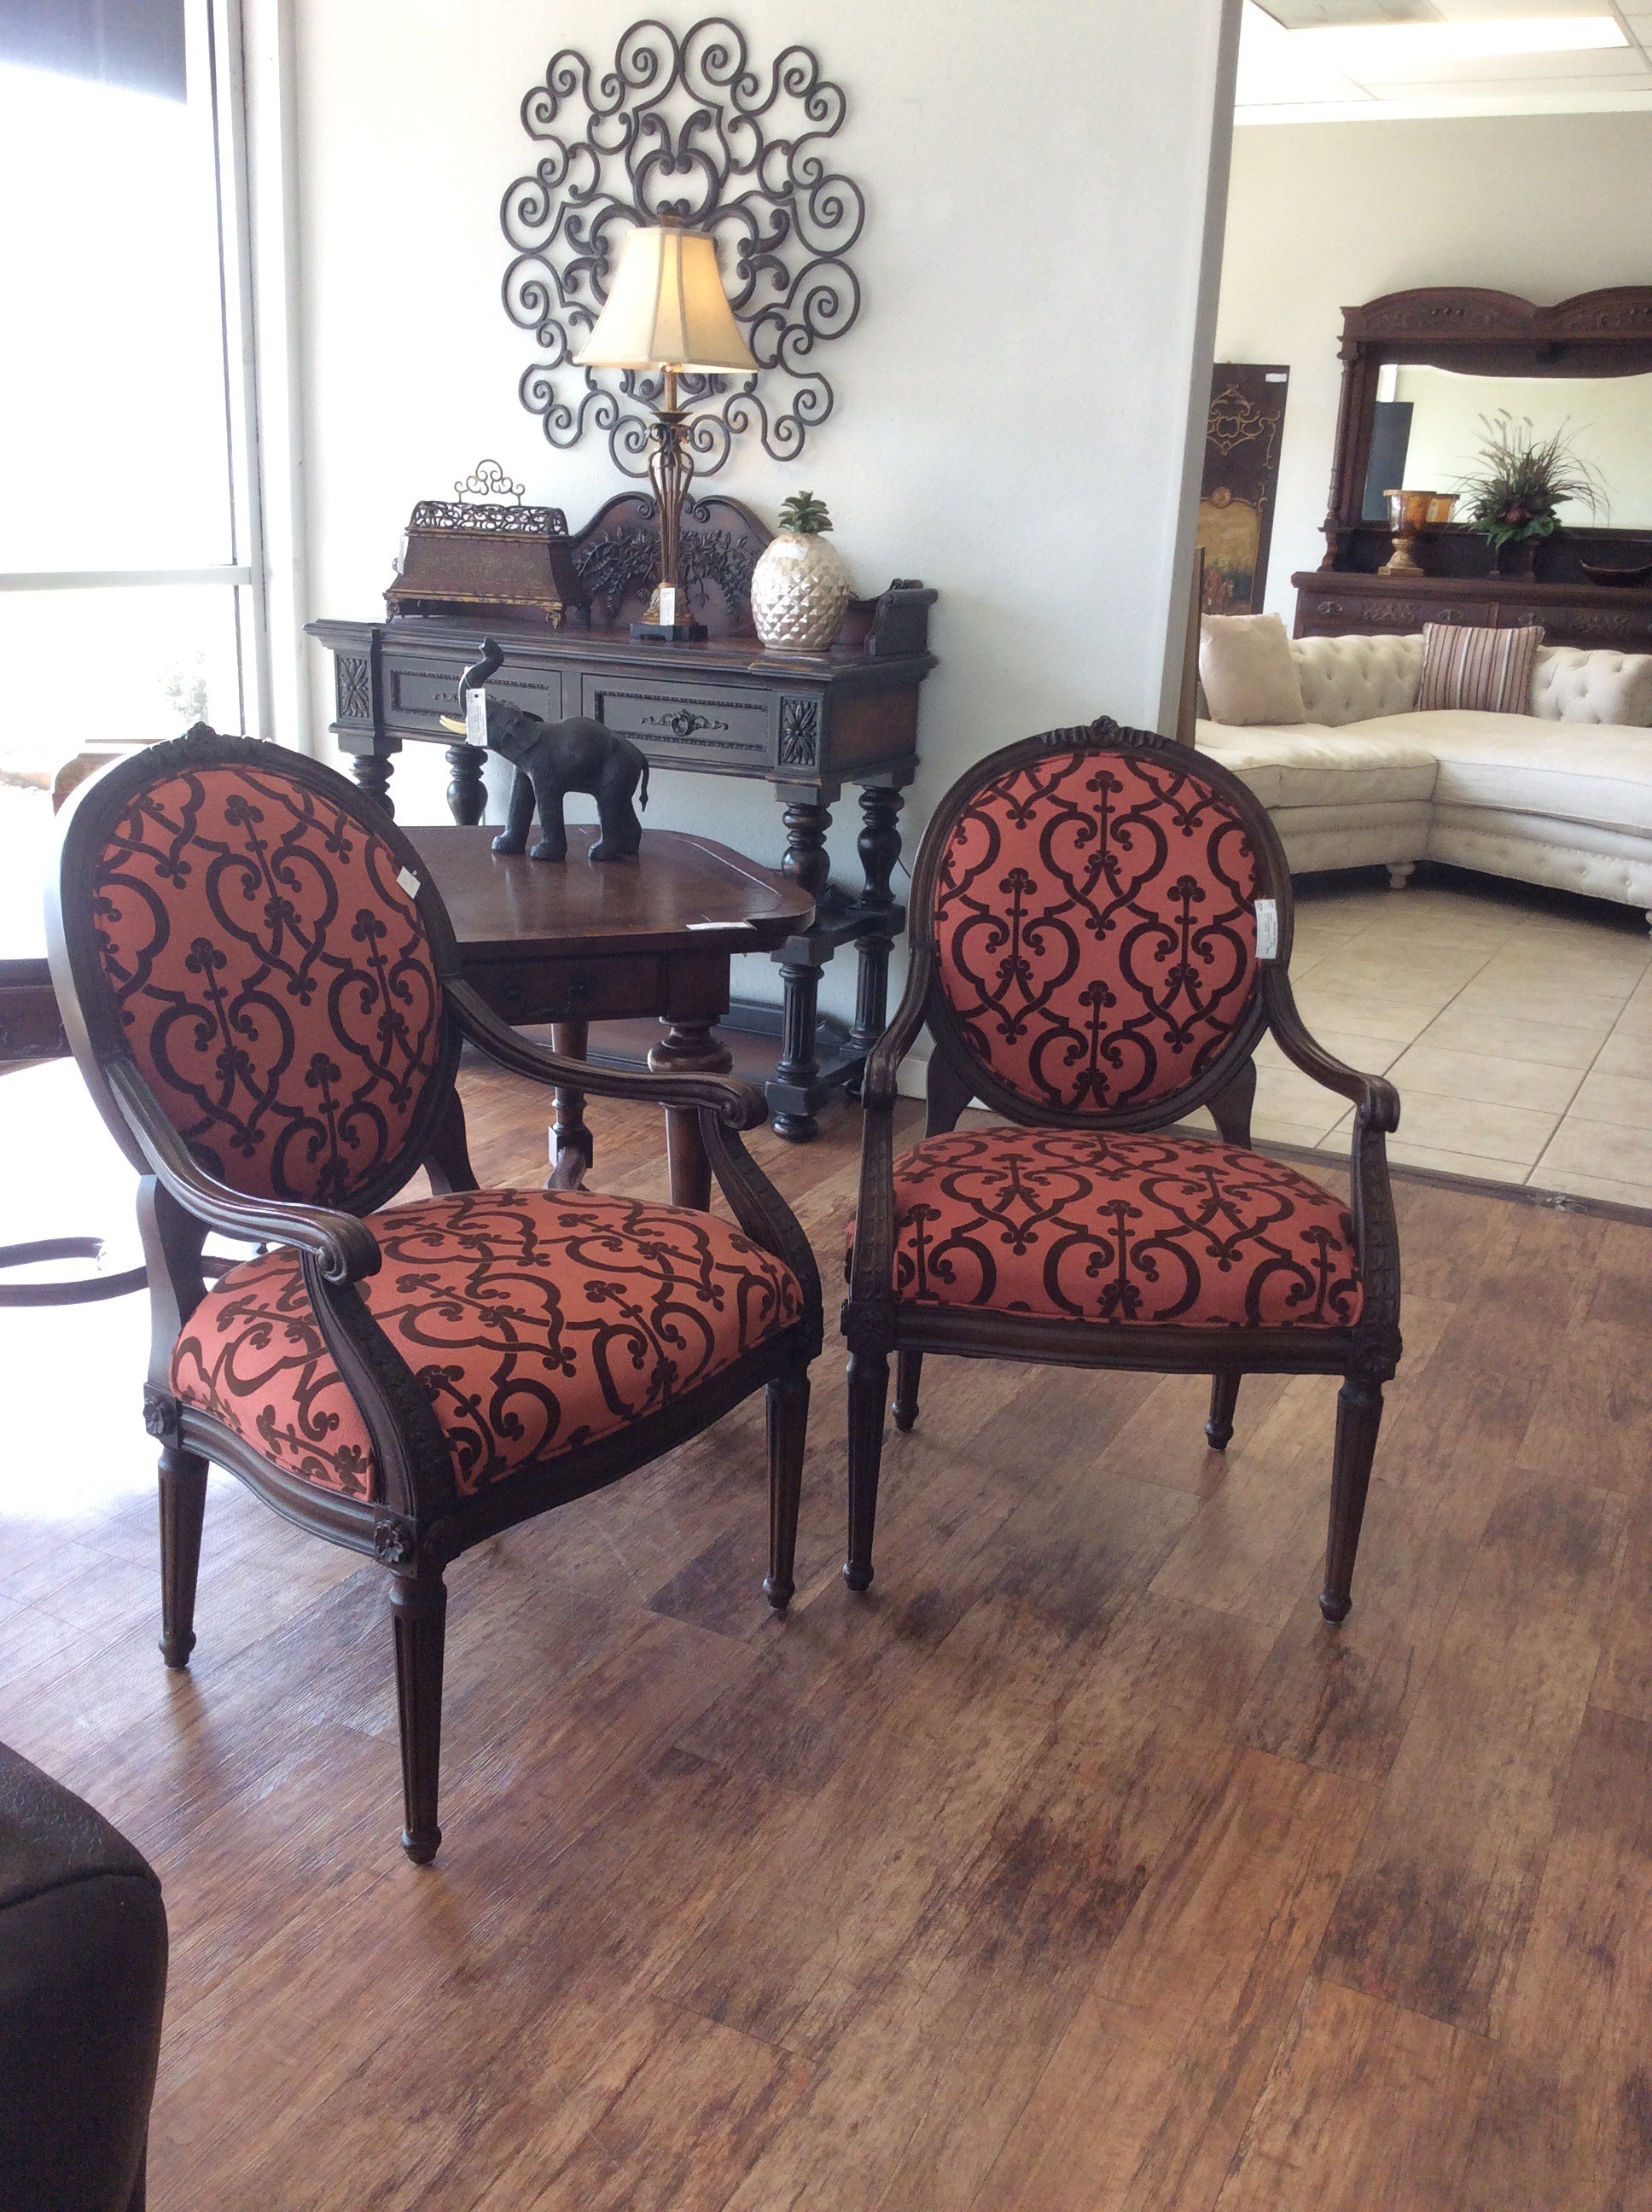 This is a very pretty pair of chairs by Hancock and Moore. They've been upholstered in a lovely scrollwork pattern of persimmon and brown.